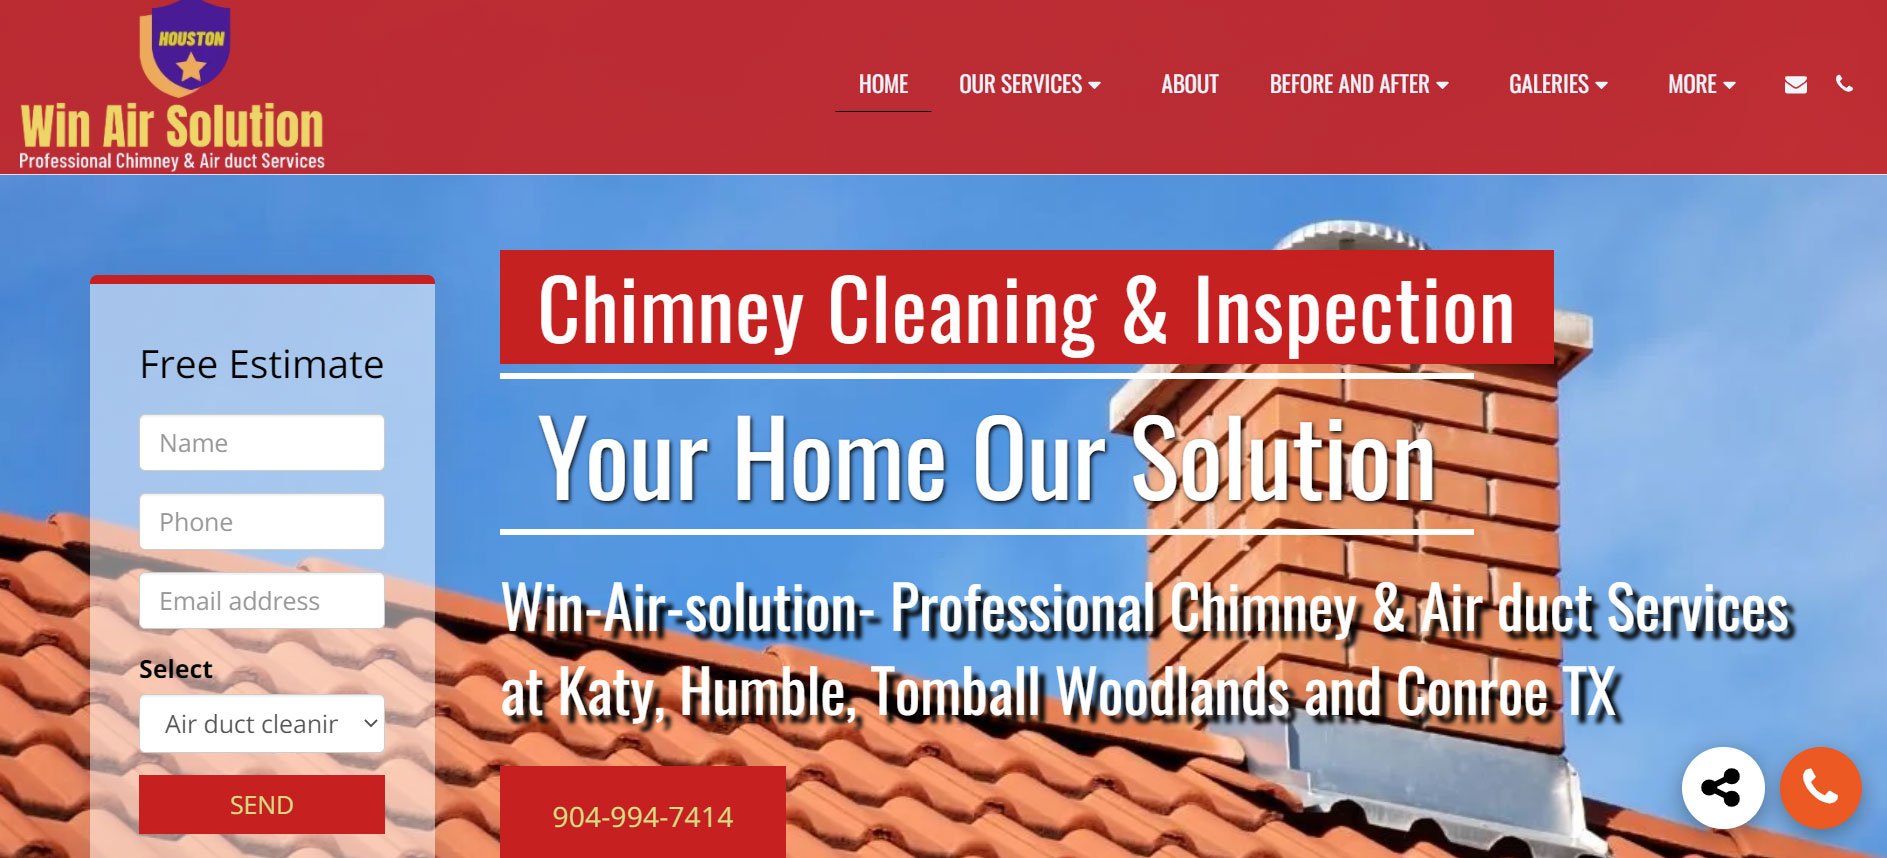 Air Duct Cleaning katy TX